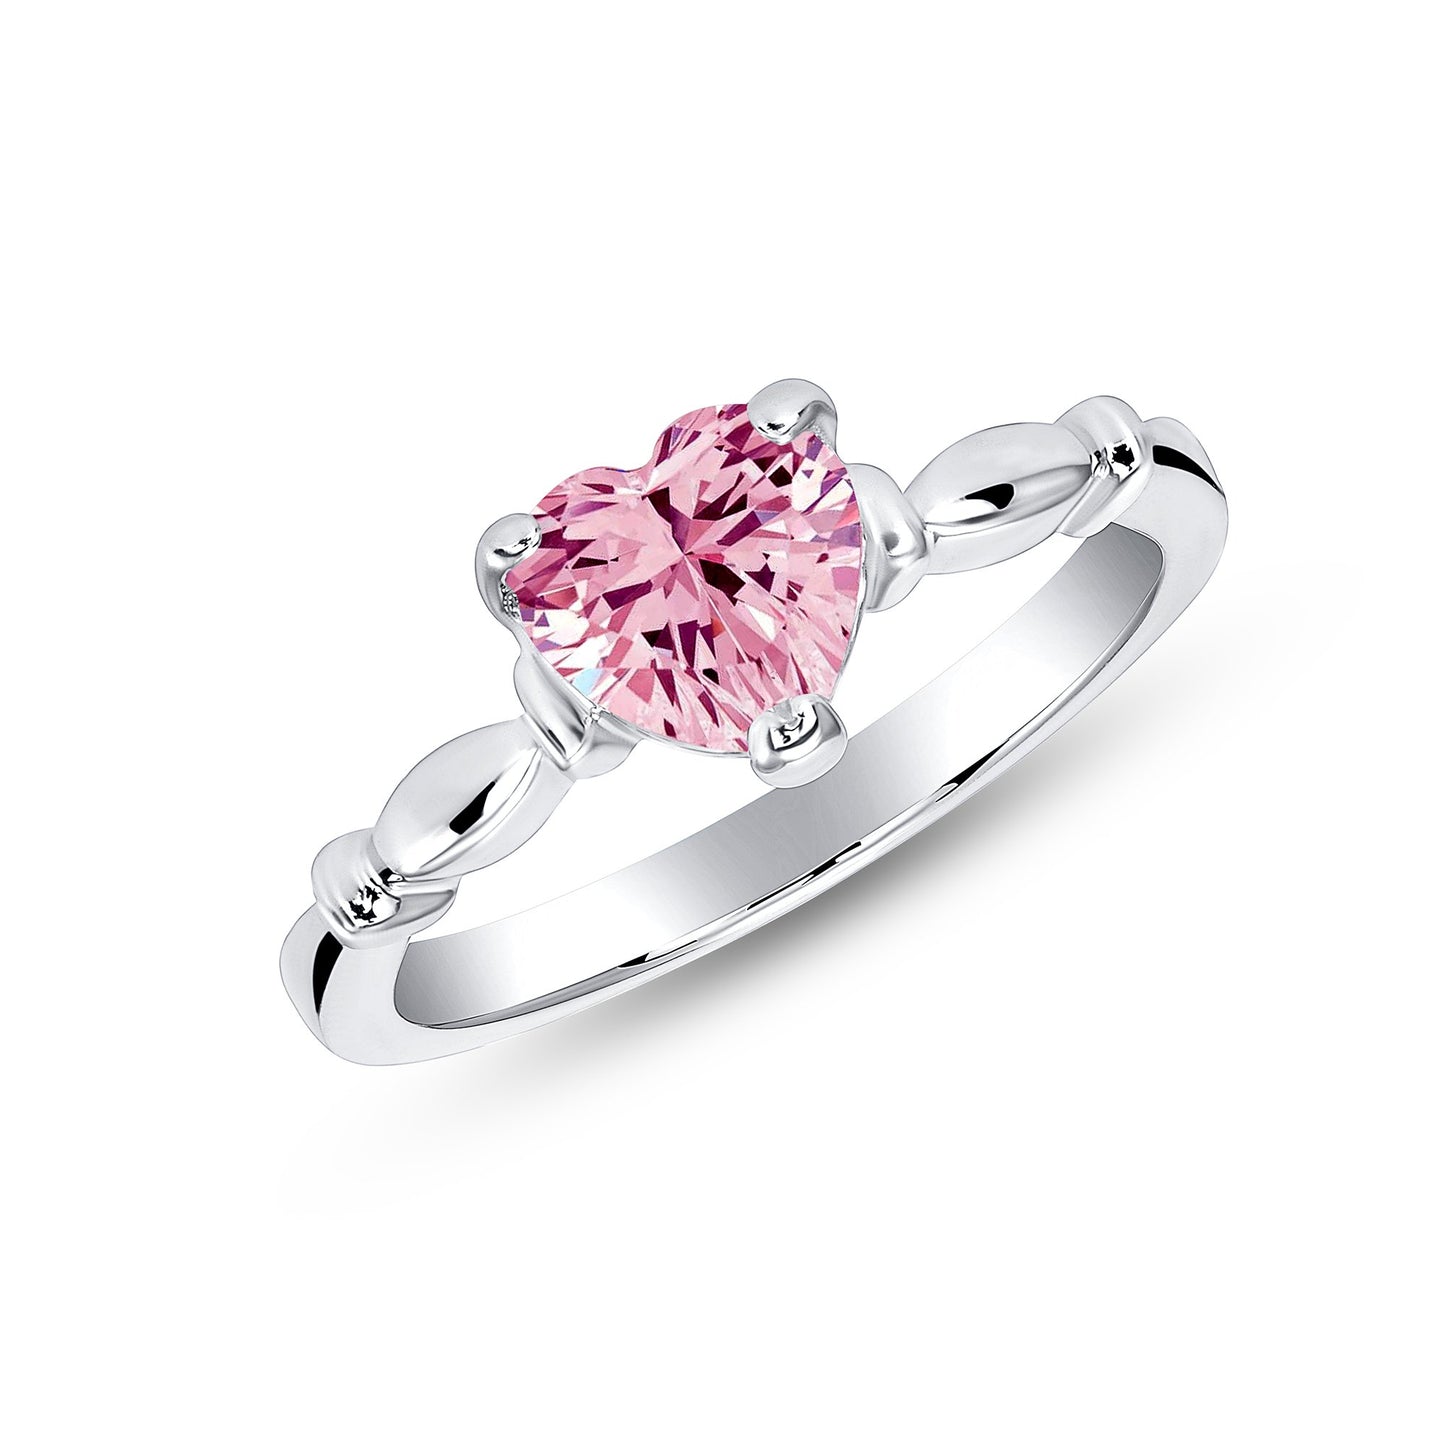 BR4193PNK. Silver 925 Rhodium Plated Pink Cubic Zirconia Fancy Heart Engagement Ring